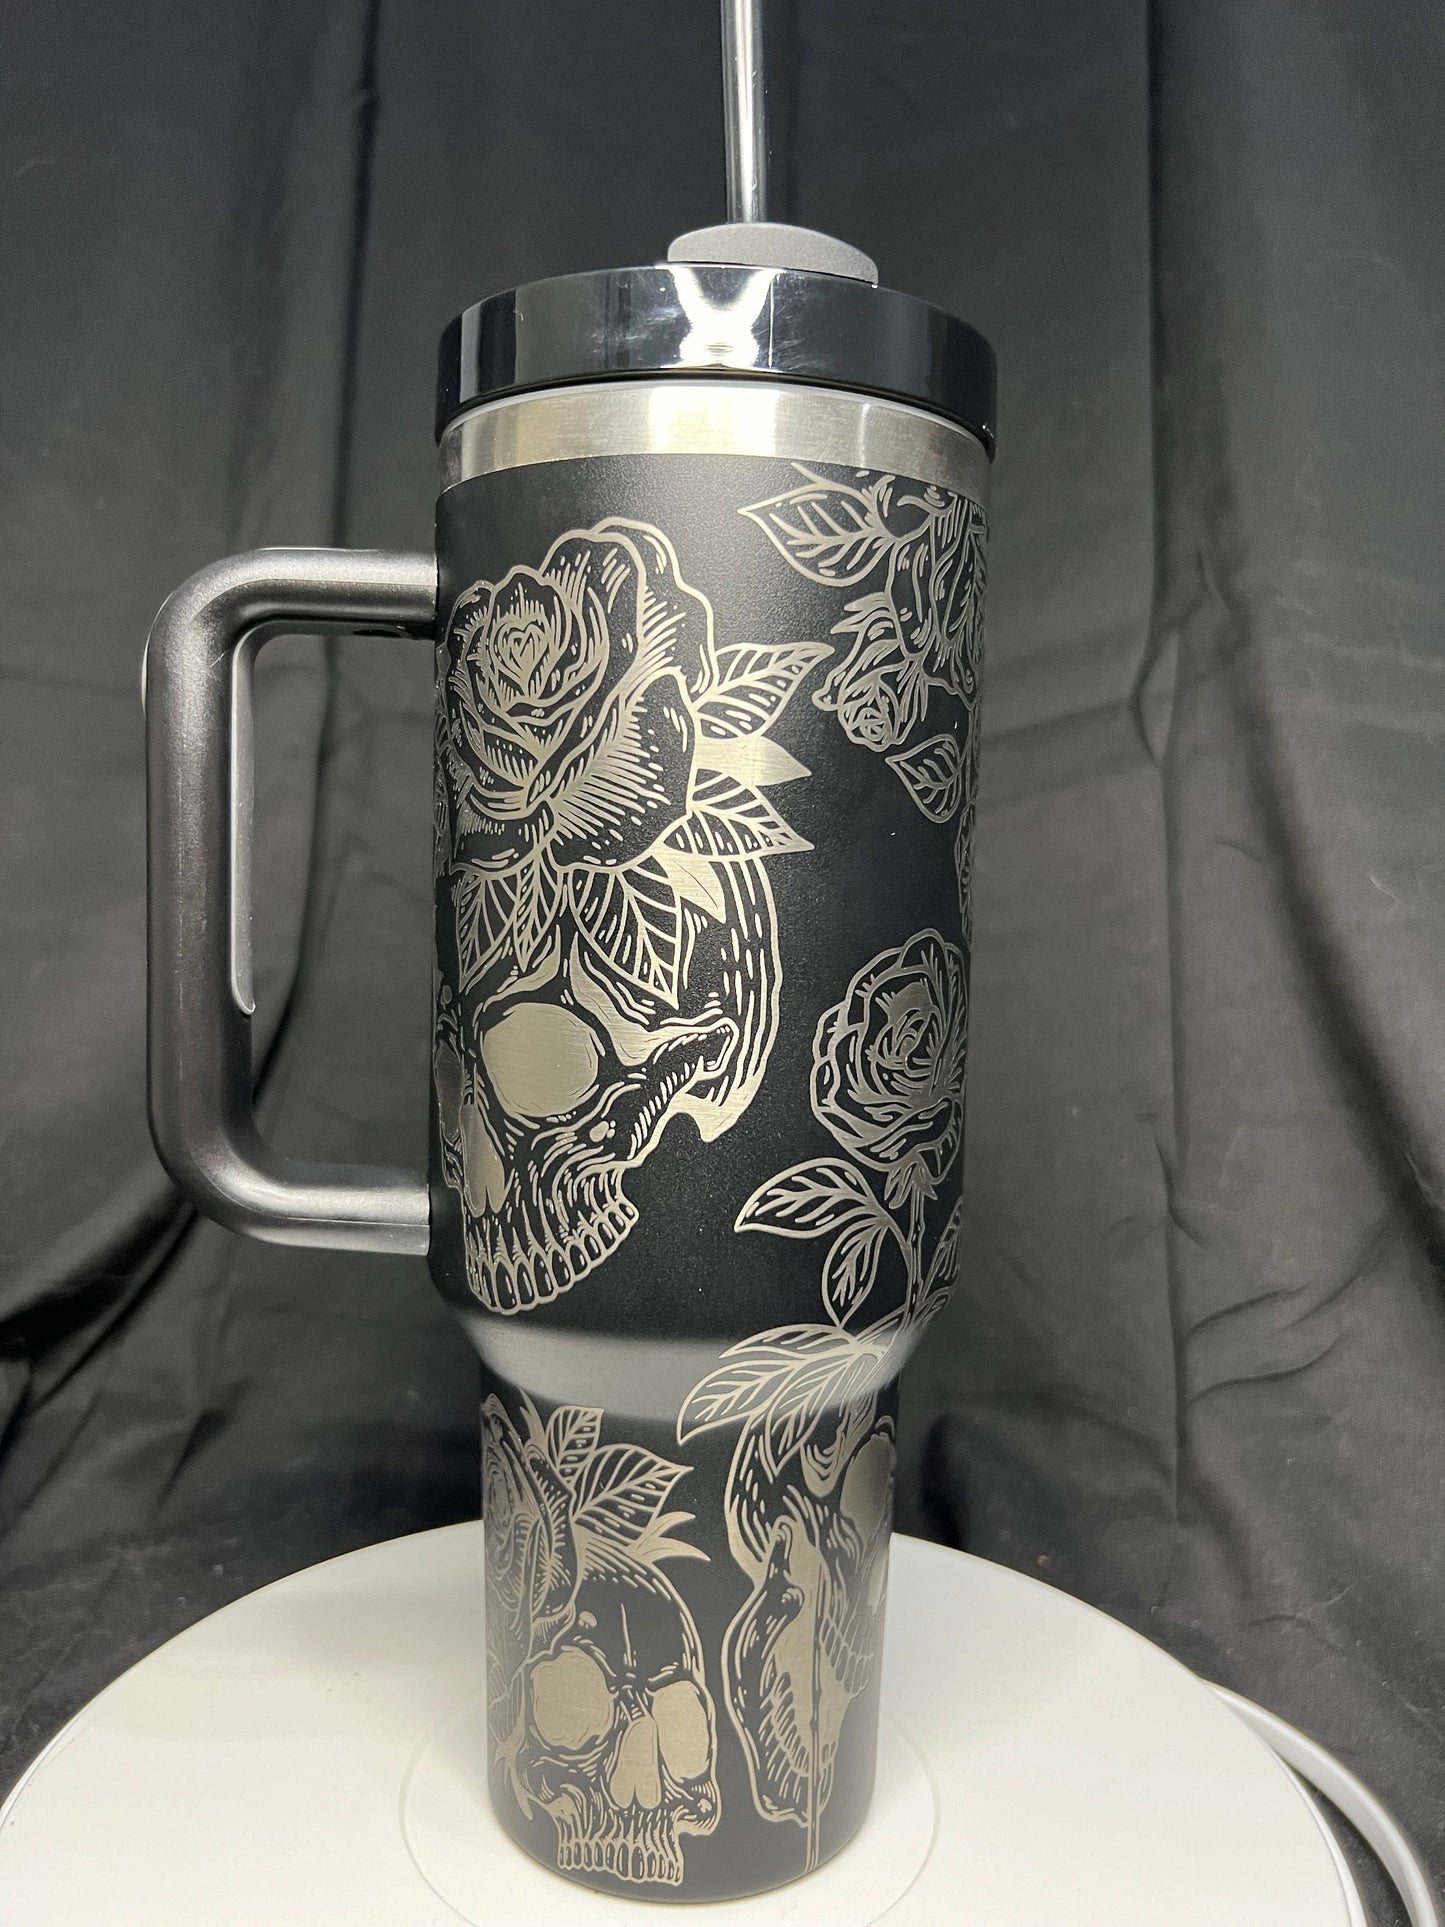 Skull and Roses Laser Engraved 40oz Black Tumbler with Handle, FREE SHIPPING!